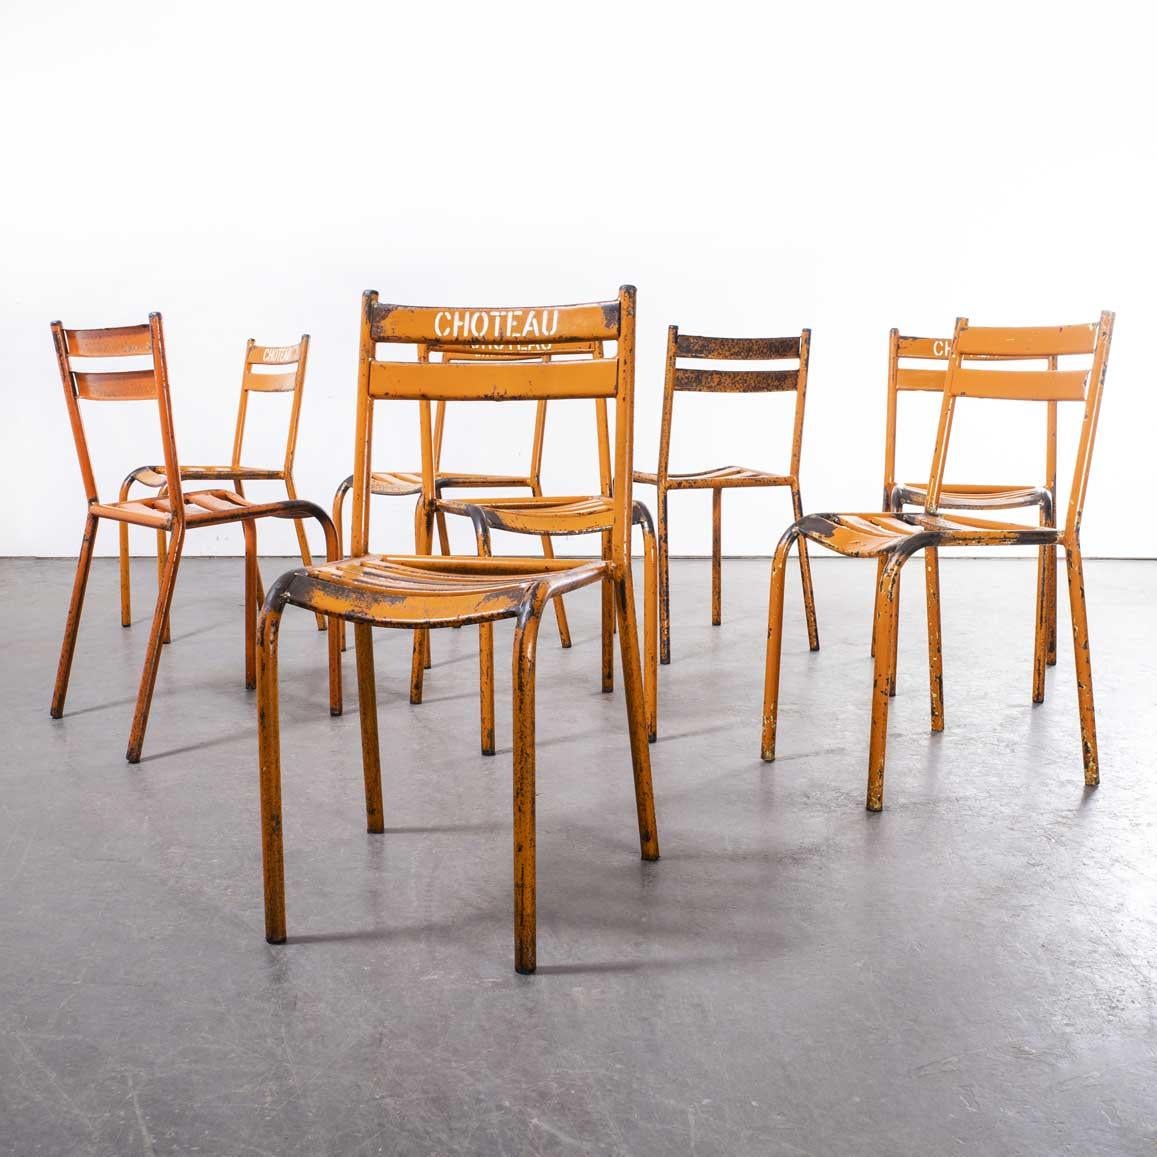 1950’s Toledo Orange Metal Stacking Outdoor Chairs – Set Of Eight
1950’s Toledo Orange Metal Stacking Outdoor Chairs – Set Of Eight. Reminiscent of Tolix but not made by Tolix, the ‘Toledo’ chair was industrially produced in the 1950’s by various